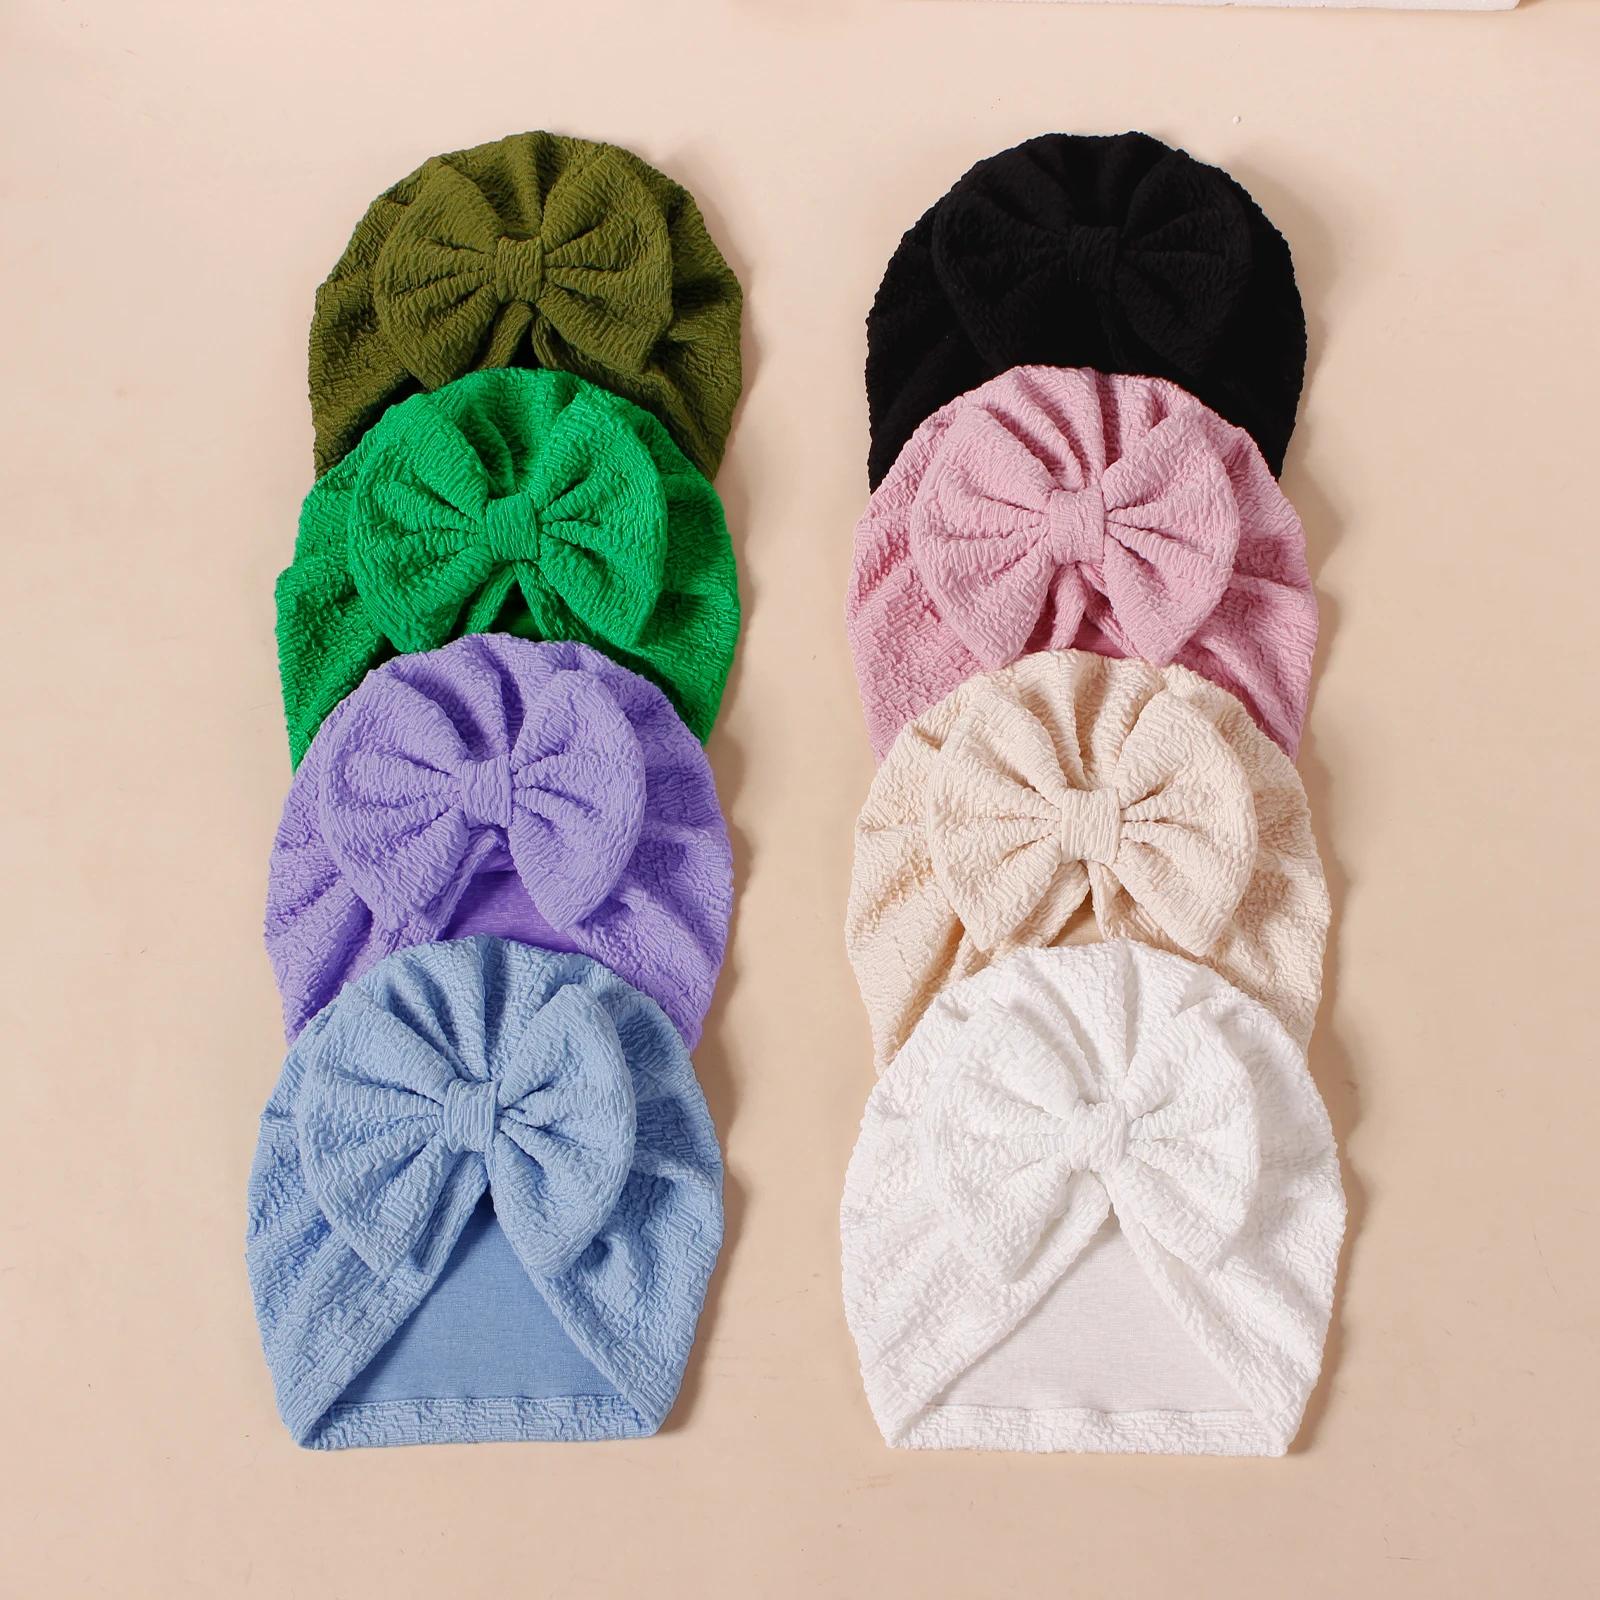 New Soft Cotton Bowknot Turban Babes Solid Color HeadWraps Solid Baby India Hat Kid Girl Infant Beanie Cap Toddler Baby Headwear solid color newborn bowknot turban elastic head waps toddler babes india hat for kids girls boys cotton beanie cap baby headwear